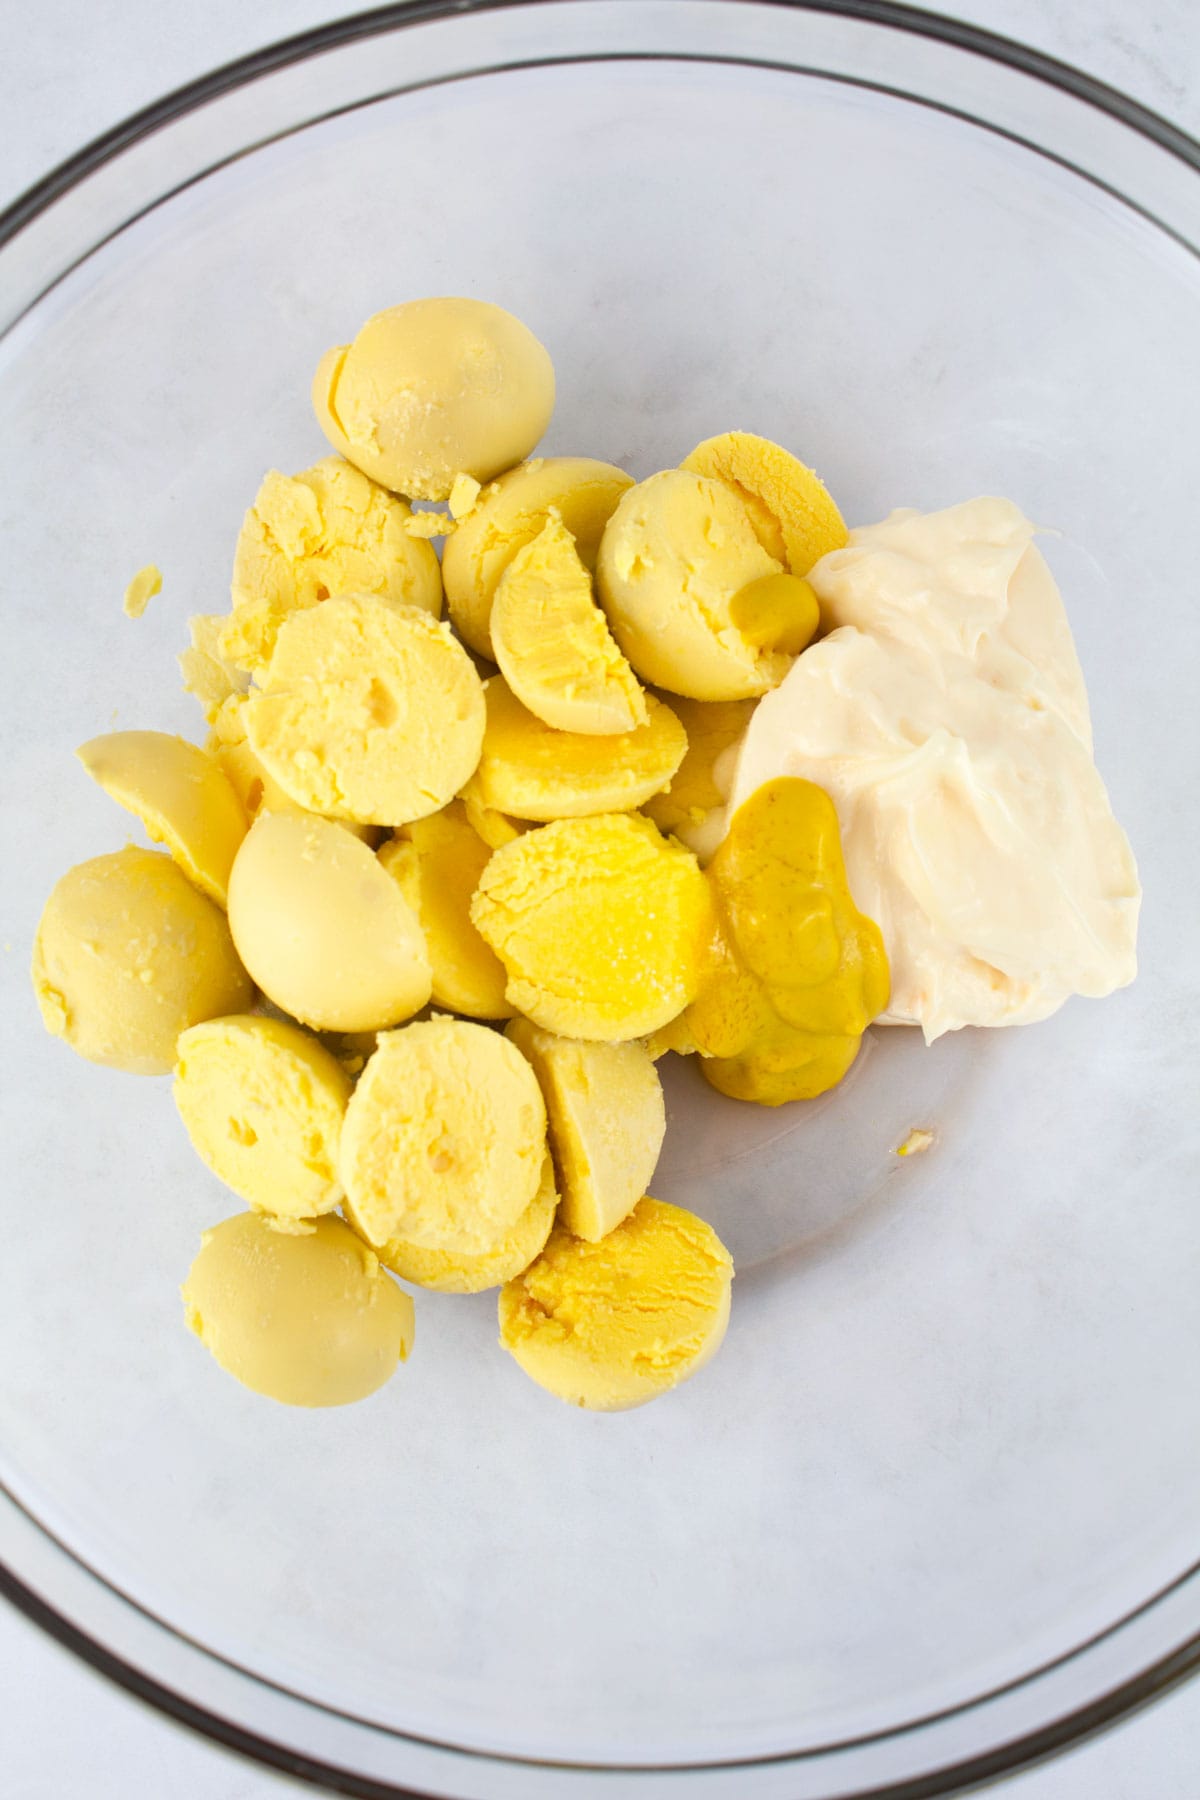 Yolks removed from hard boiled eggs and placed in a bowl with mayonnaise, mustard, and vinegar.